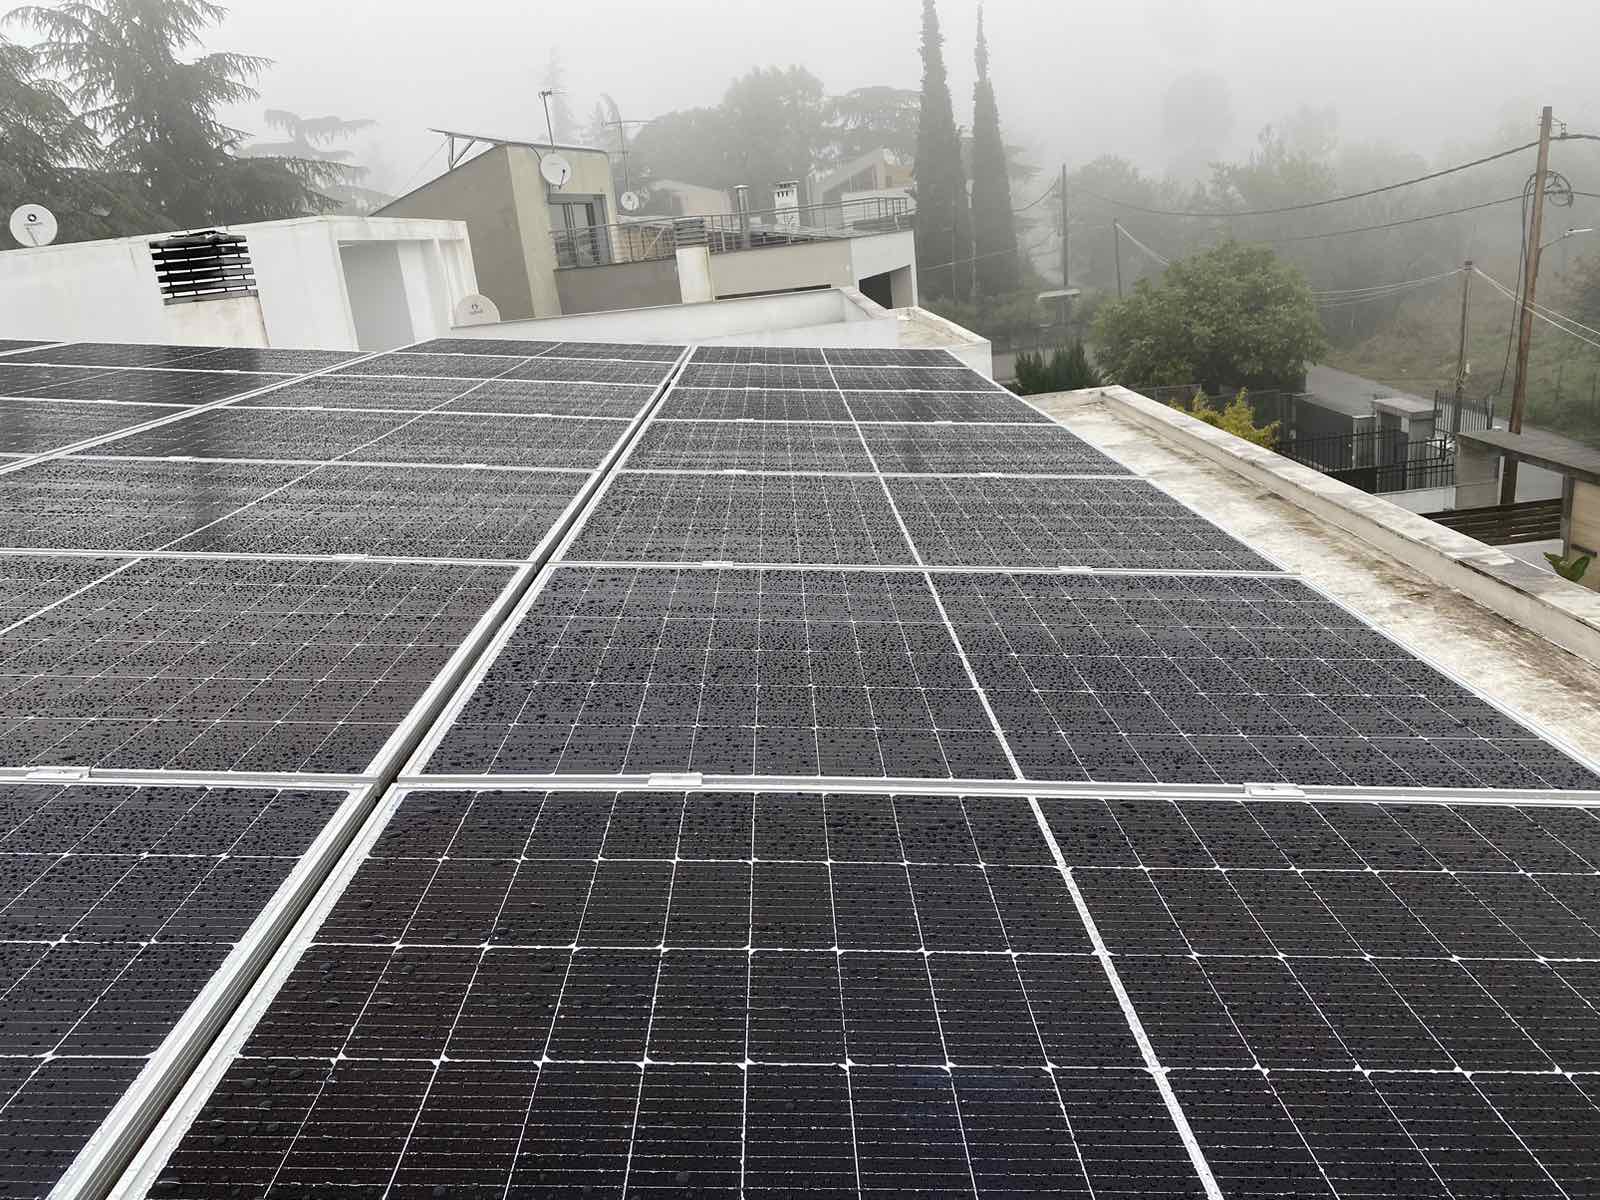 NEW ECOSUN HOME NET METERING PROJECT 1066kW AΘΗΝΑ 2